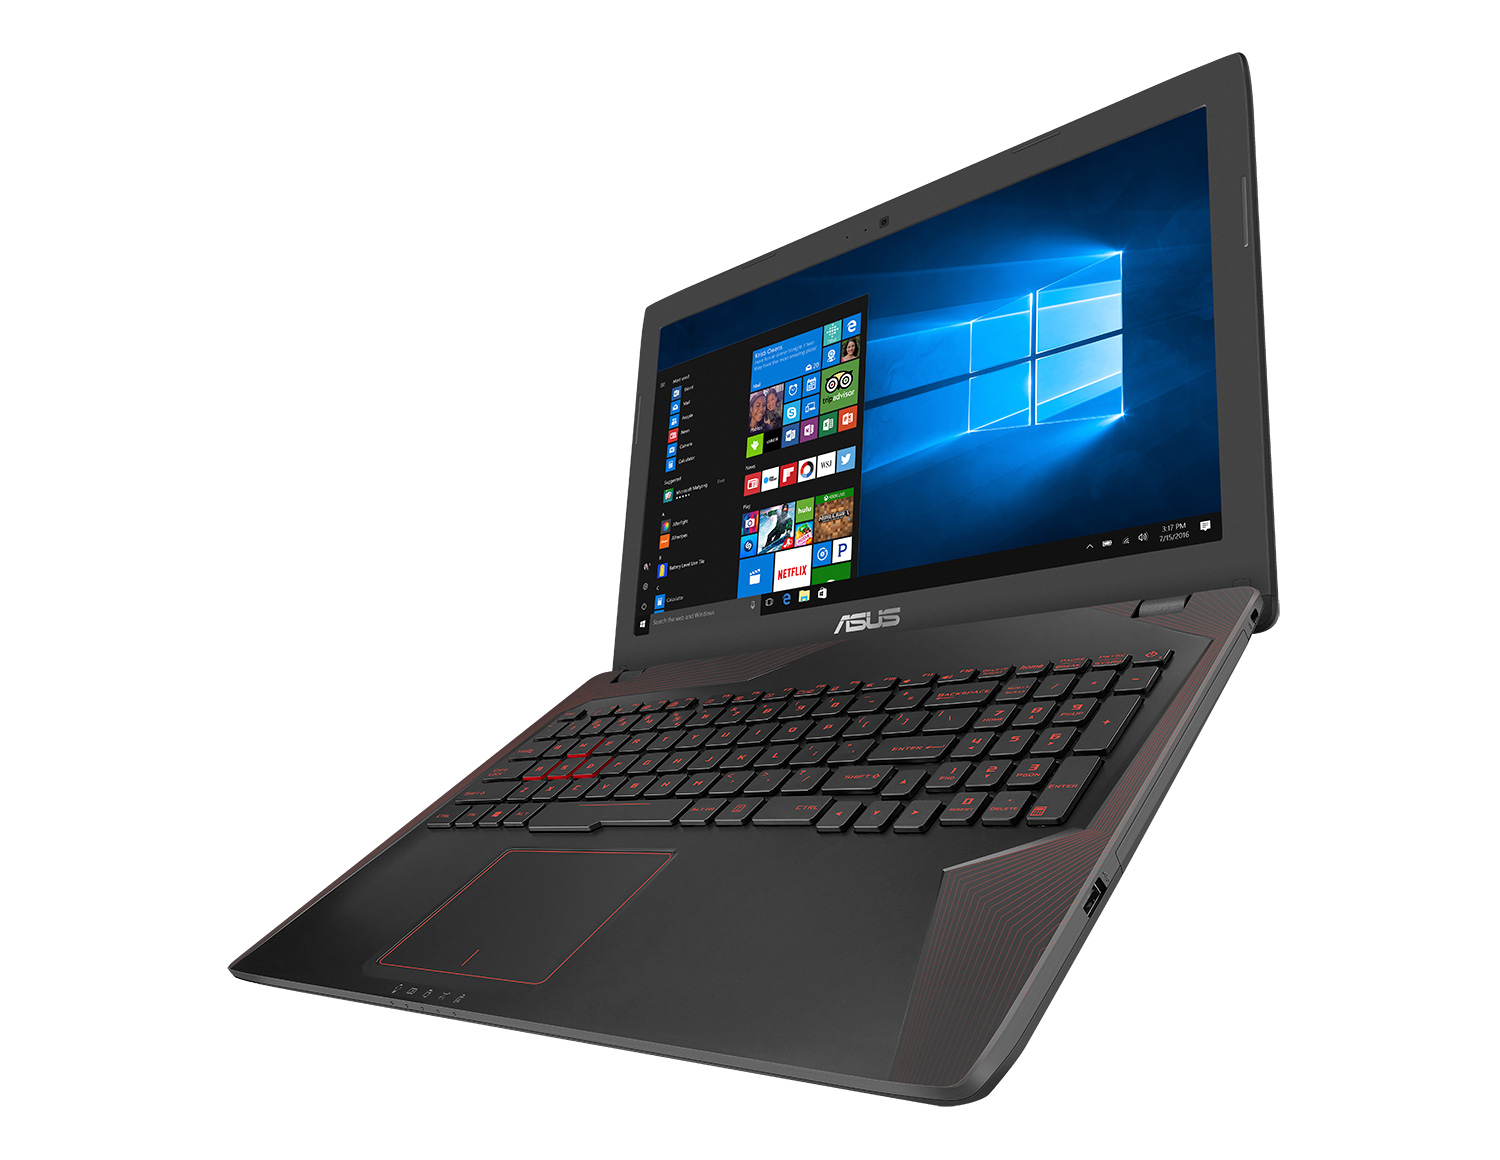 ASUS FX553 Is an Affordable Gaming Laptop